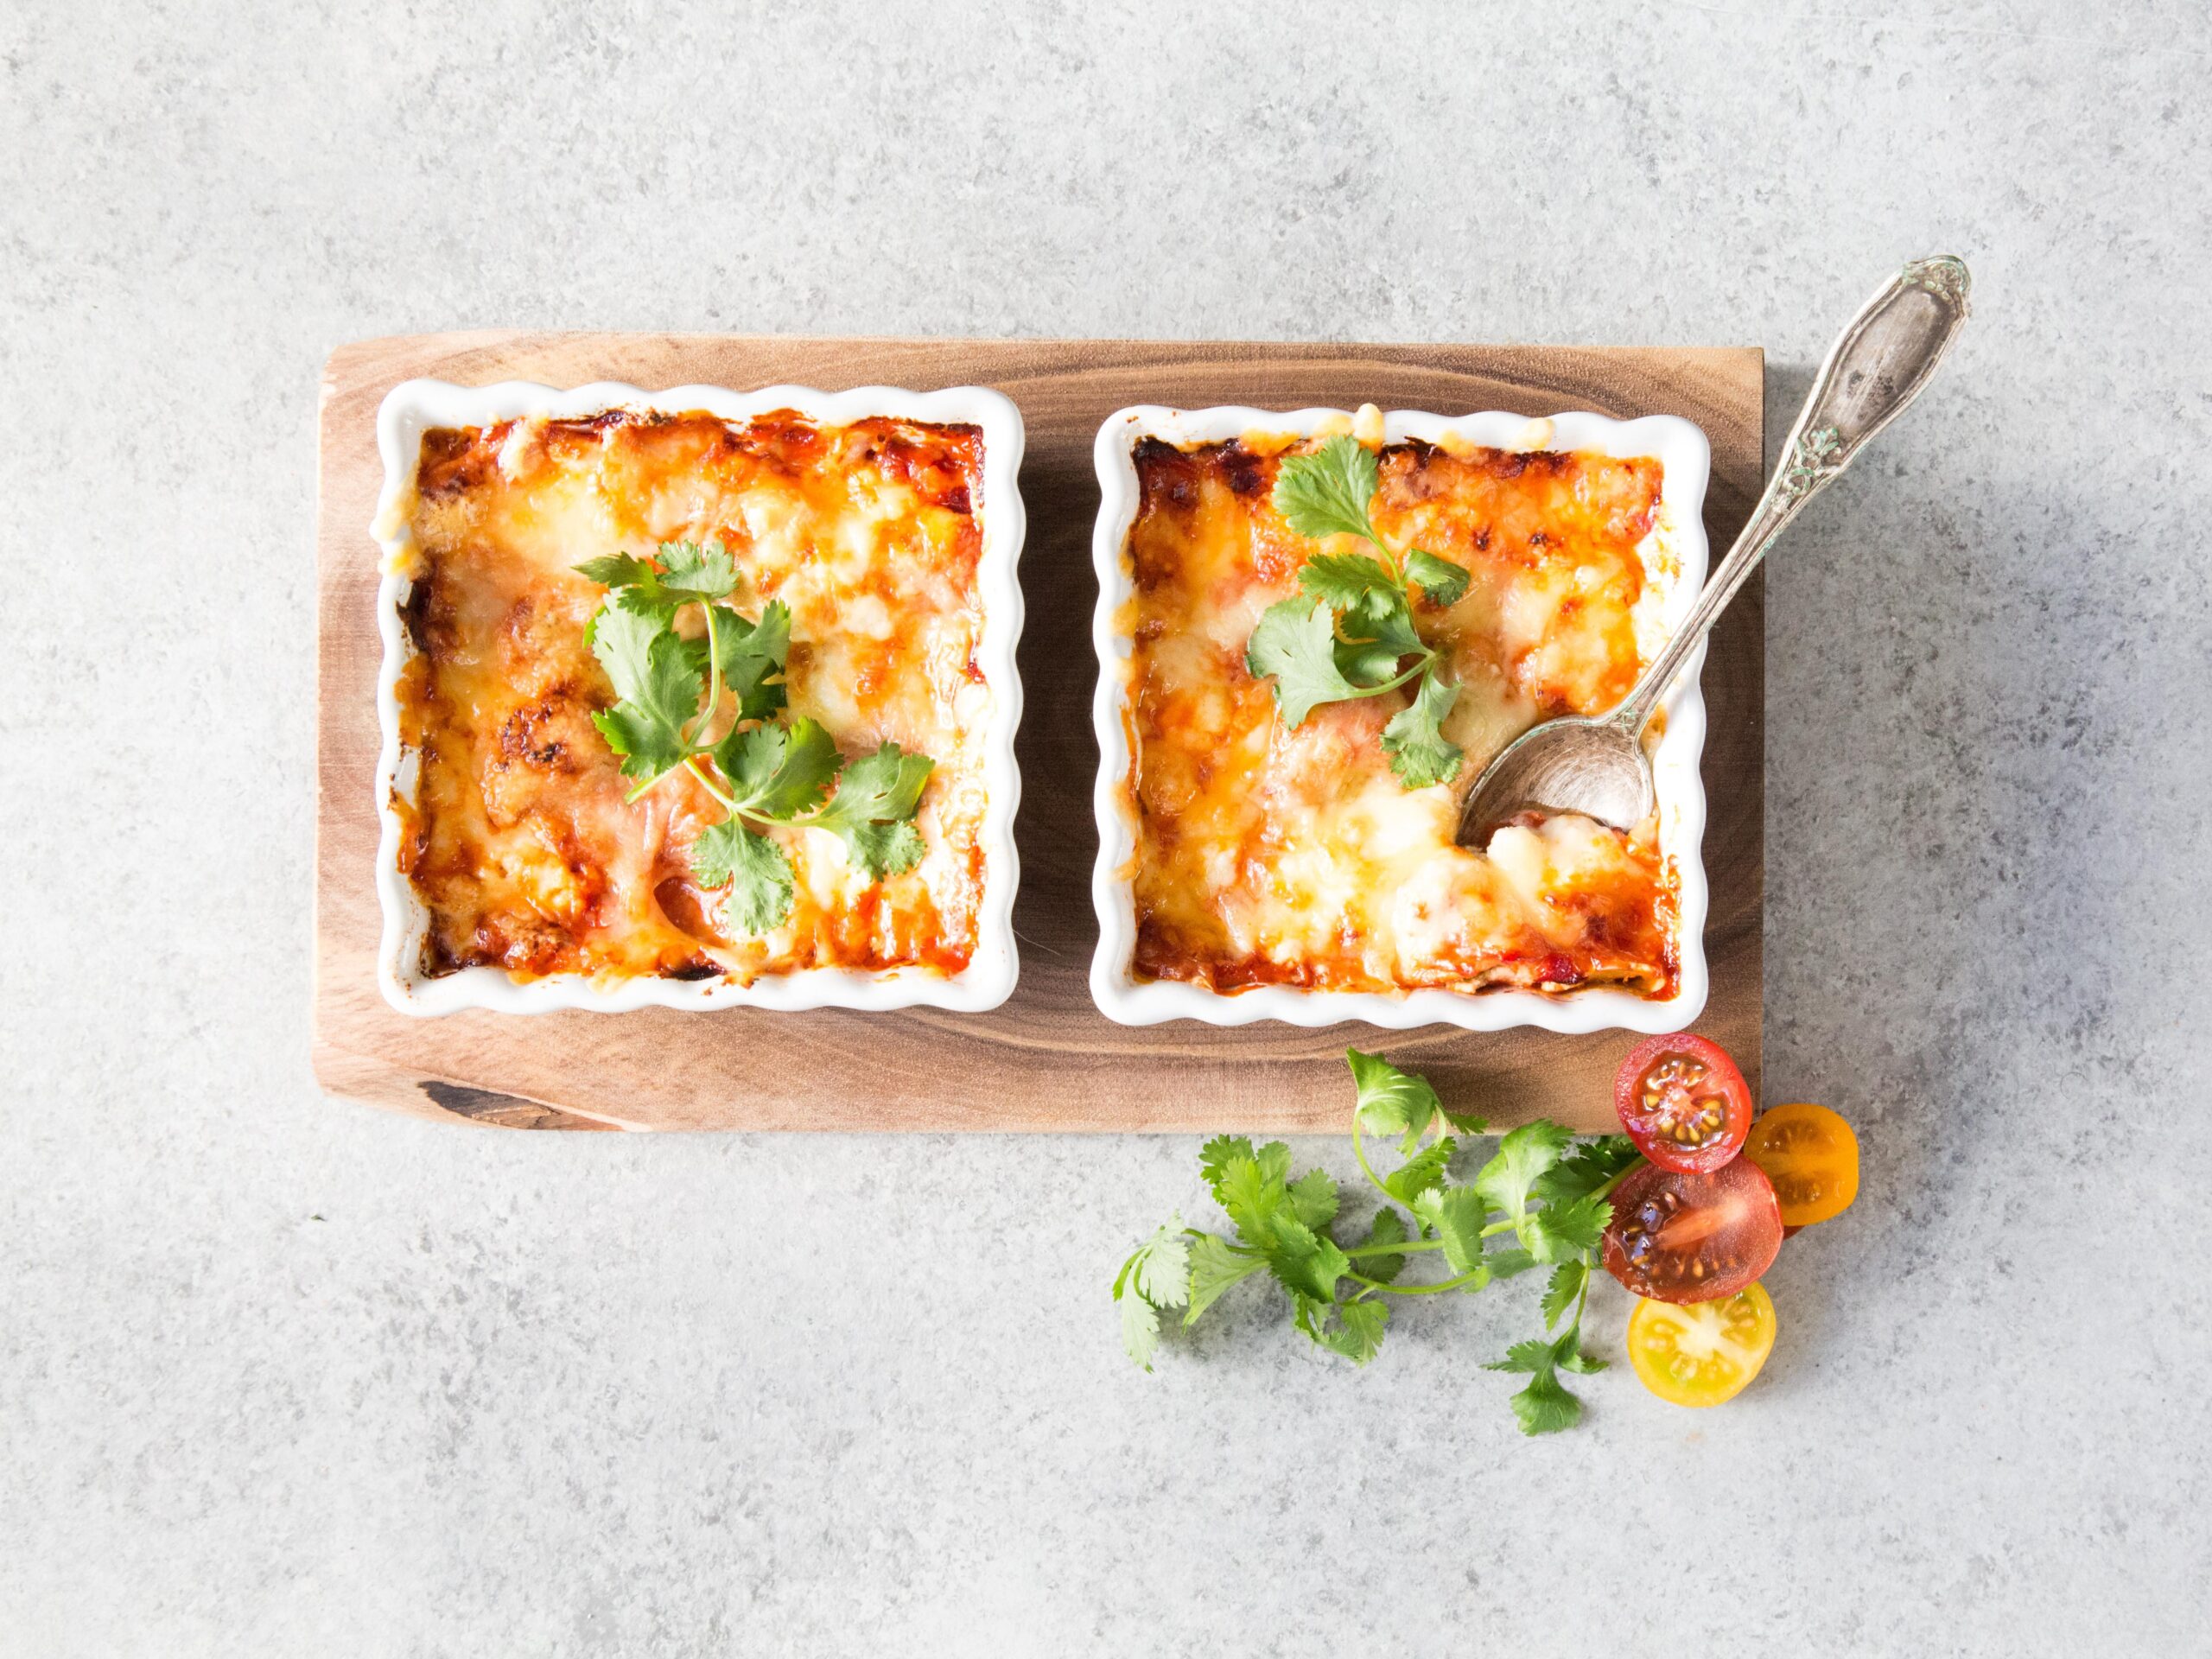  Who says comfort food can't be healthy? This vegetarian lasagna will warm both your belly and your soul.